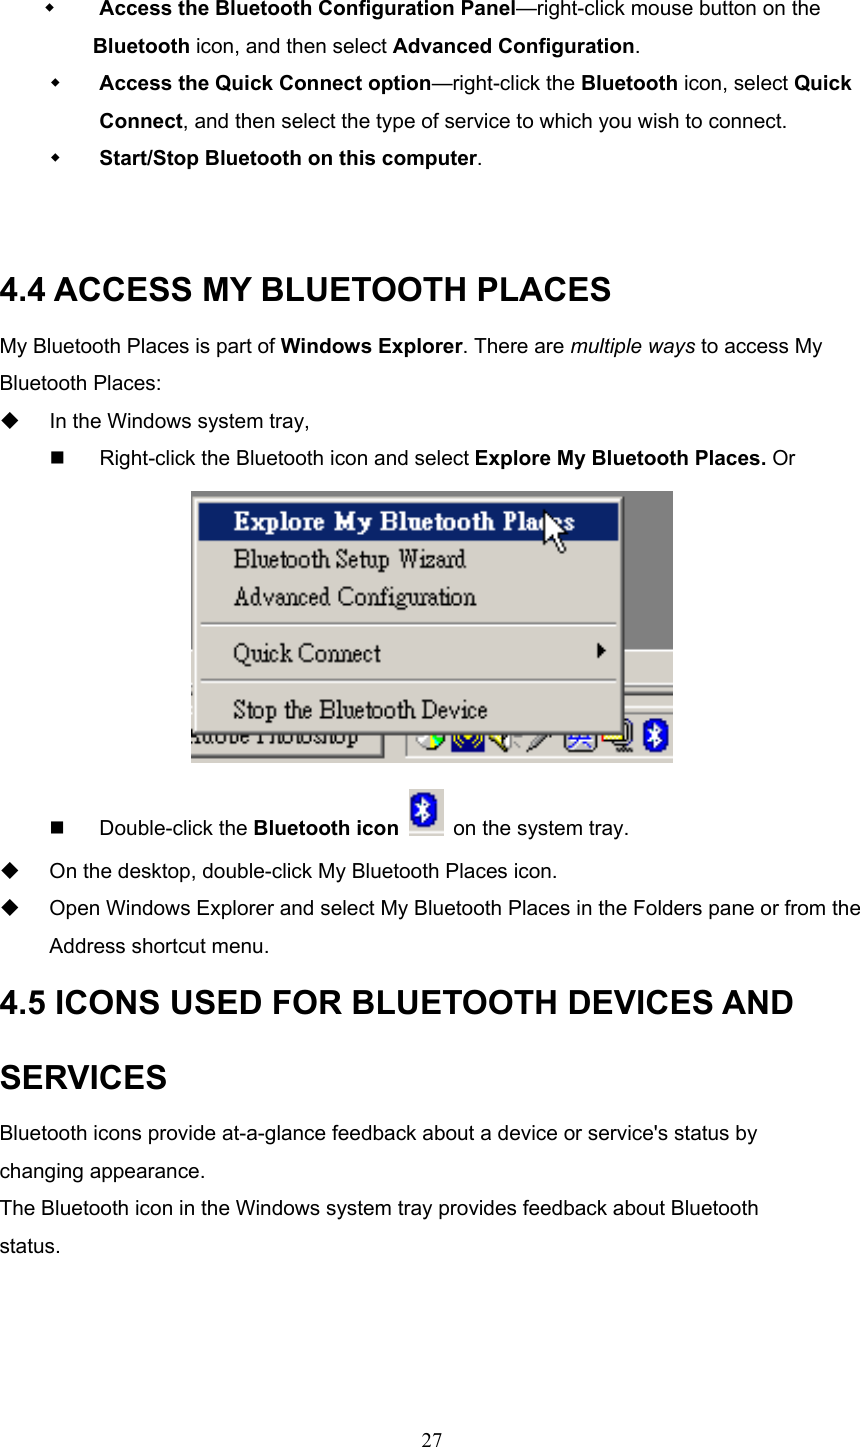  27    Access the Bluetooth Configuration Panel—right-click mouse button on the          Bluetooth icon, and then select Advanced Configuration.   Access the Quick Connect option—right-click the Bluetooth icon, select Quick Connect, and then select the type of service to which you wish to connect.   Start/Stop Bluetooth on this computer.   4.4 ACCESS MY BLUETOOTH PLACES My Bluetooth Places is part of Windows Explorer. There are multiple ways to access My Bluetooth Places:     In the Windows system tray,     Right-click the Bluetooth icon and select Explore My Bluetooth Places. Or    Double-click the Bluetooth icon   on the system tray.   On the desktop, double-click My Bluetooth Places icon.     Open Windows Explorer and select My Bluetooth Places in the Folders pane or from the Address shortcut menu. 4.5 ICONS USED FOR BLUETOOTH DEVICES AND SERVICES Bluetooth icons provide at-a-glance feedback about a device or service&apos;s status by changing appearance. The Bluetooth icon in the Windows system tray provides feedback about Bluetooth status.    